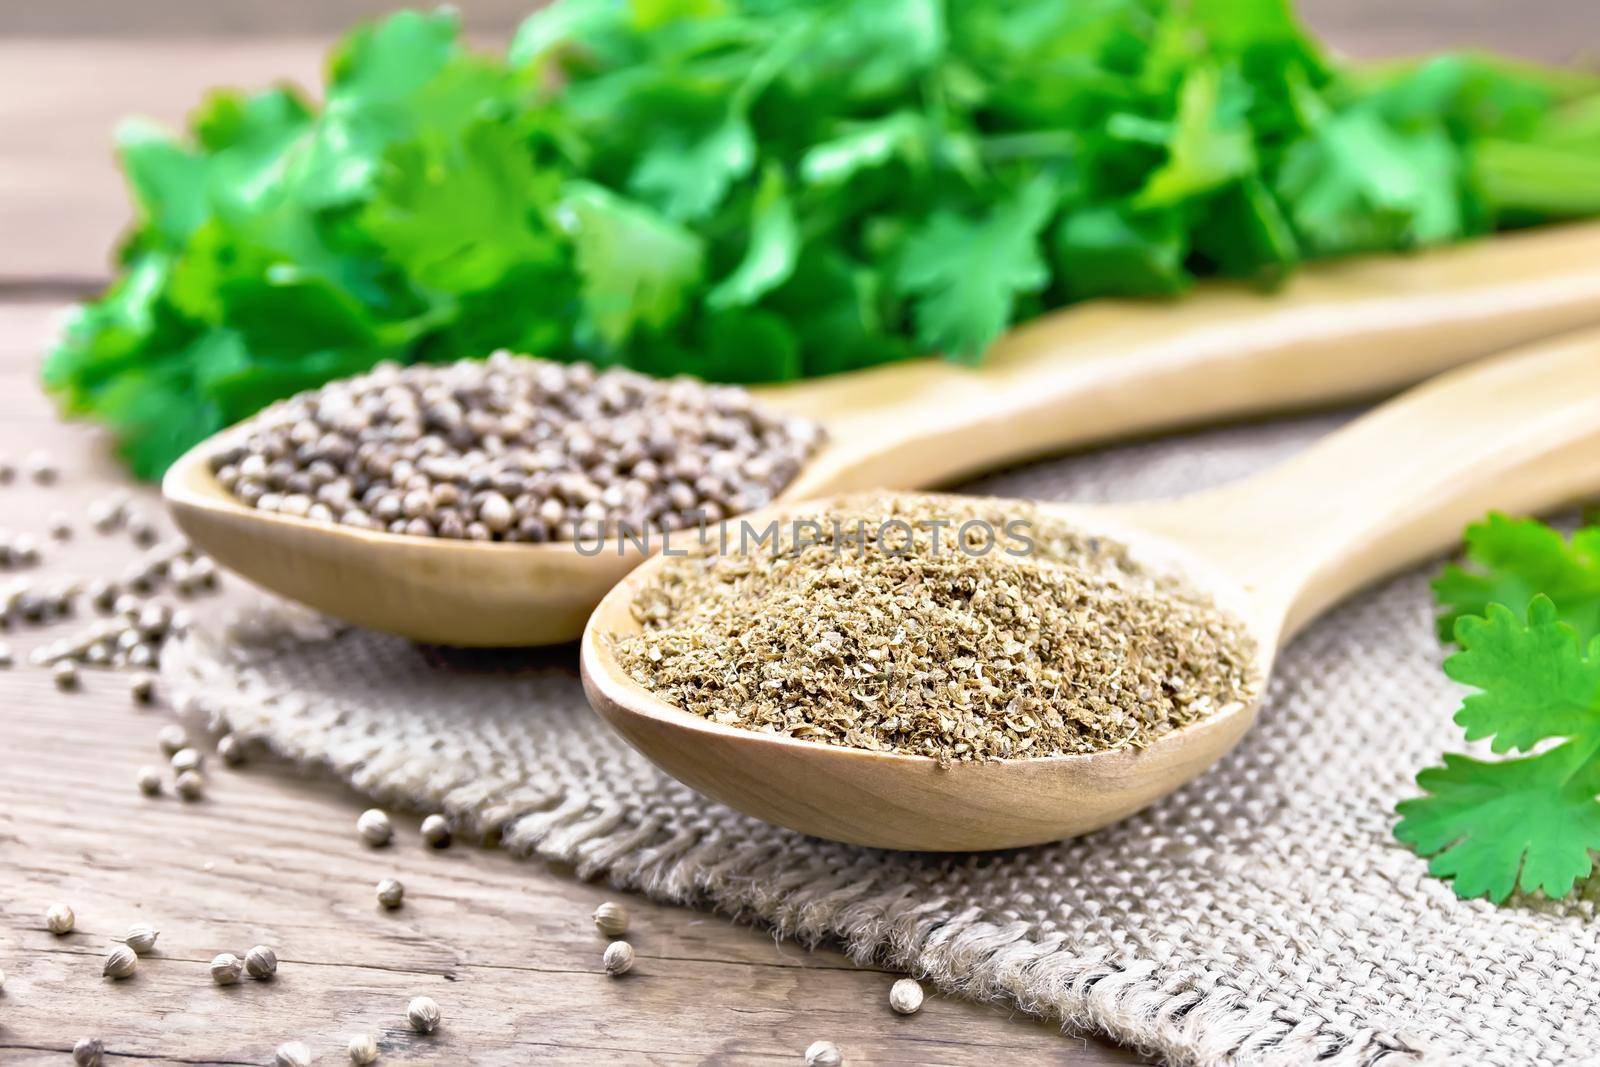 Coriander seeds and ground in two spoons on burlap, green fresh cilantro on a background of an old wooden board